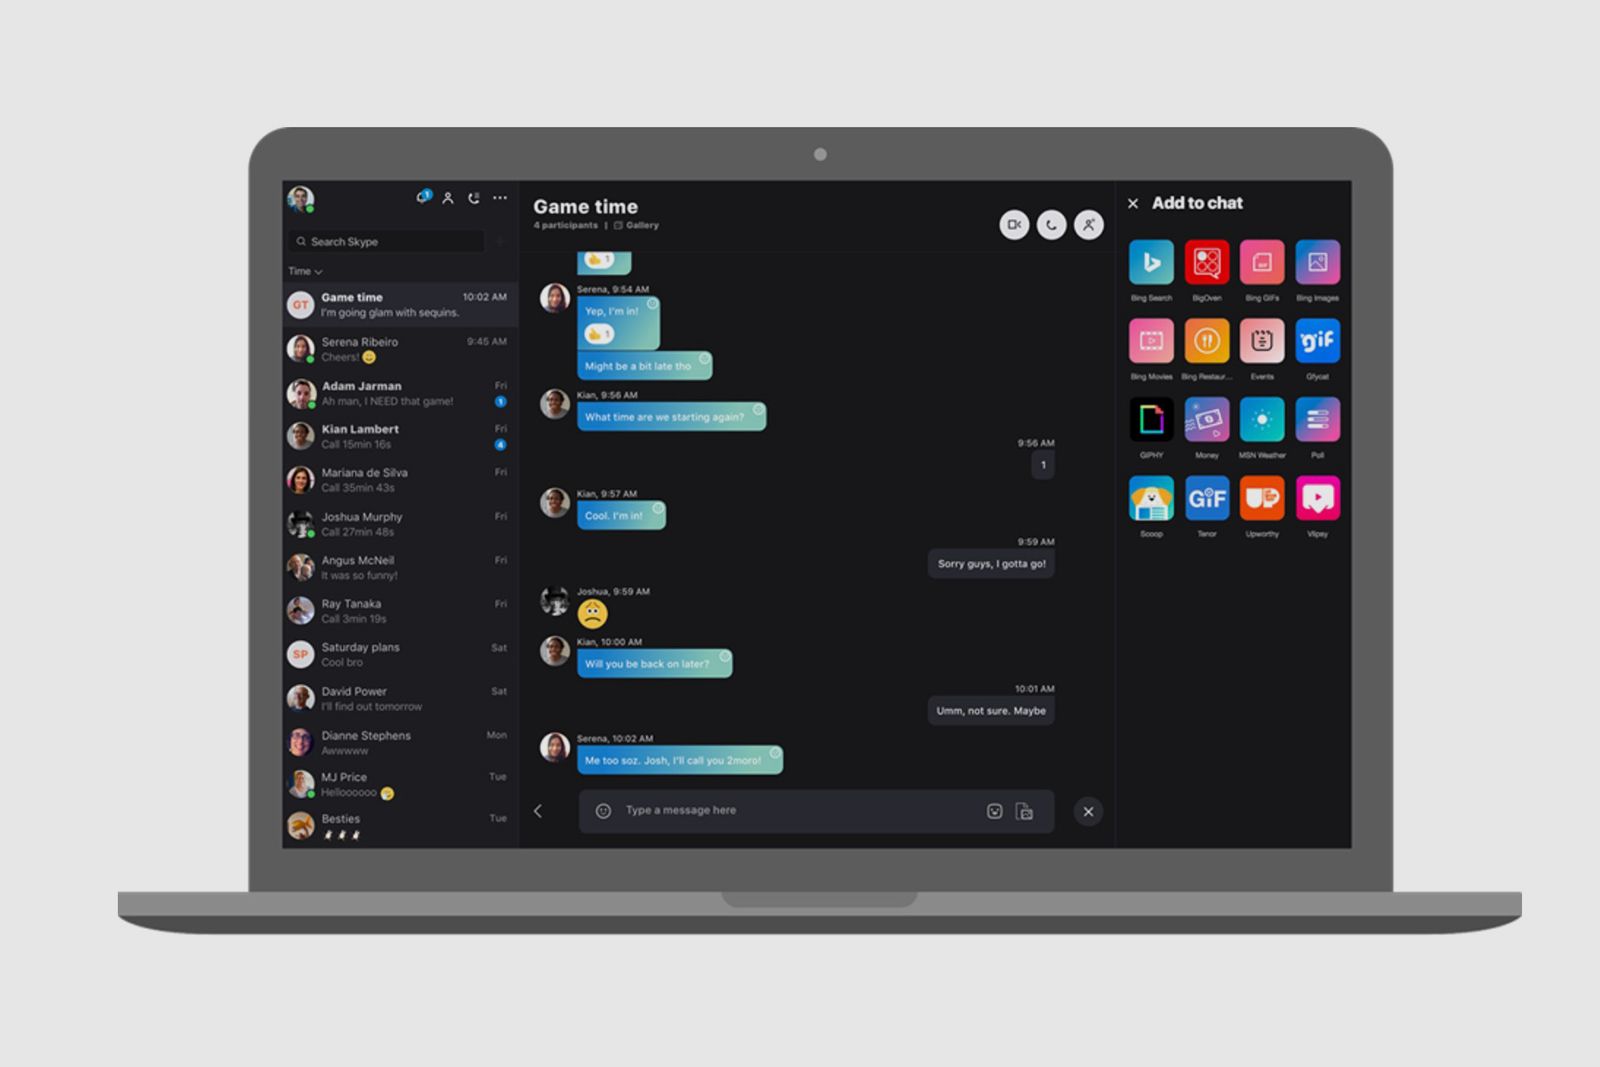 Skypes new look comes to desktops Whats new and different image 2